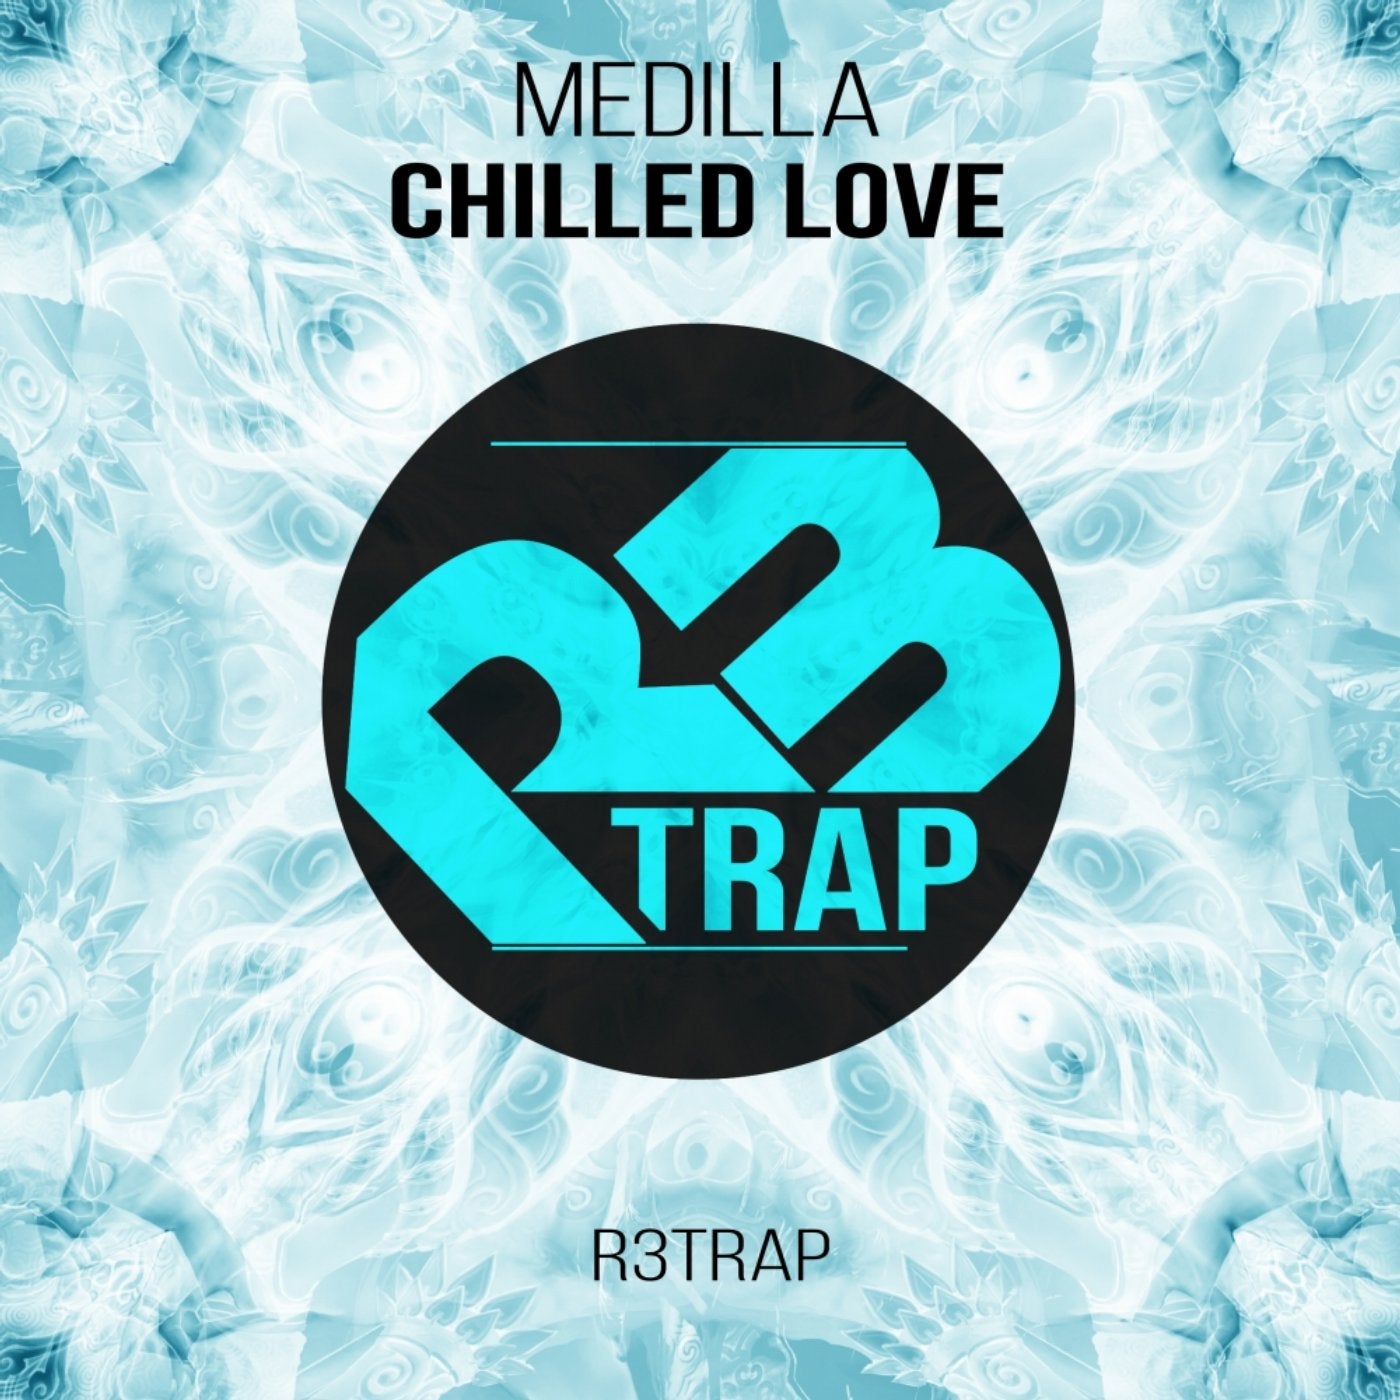 Chilled love. Медилла. Chilled. Chill Love. Annzy field of Flowers Original Mix.